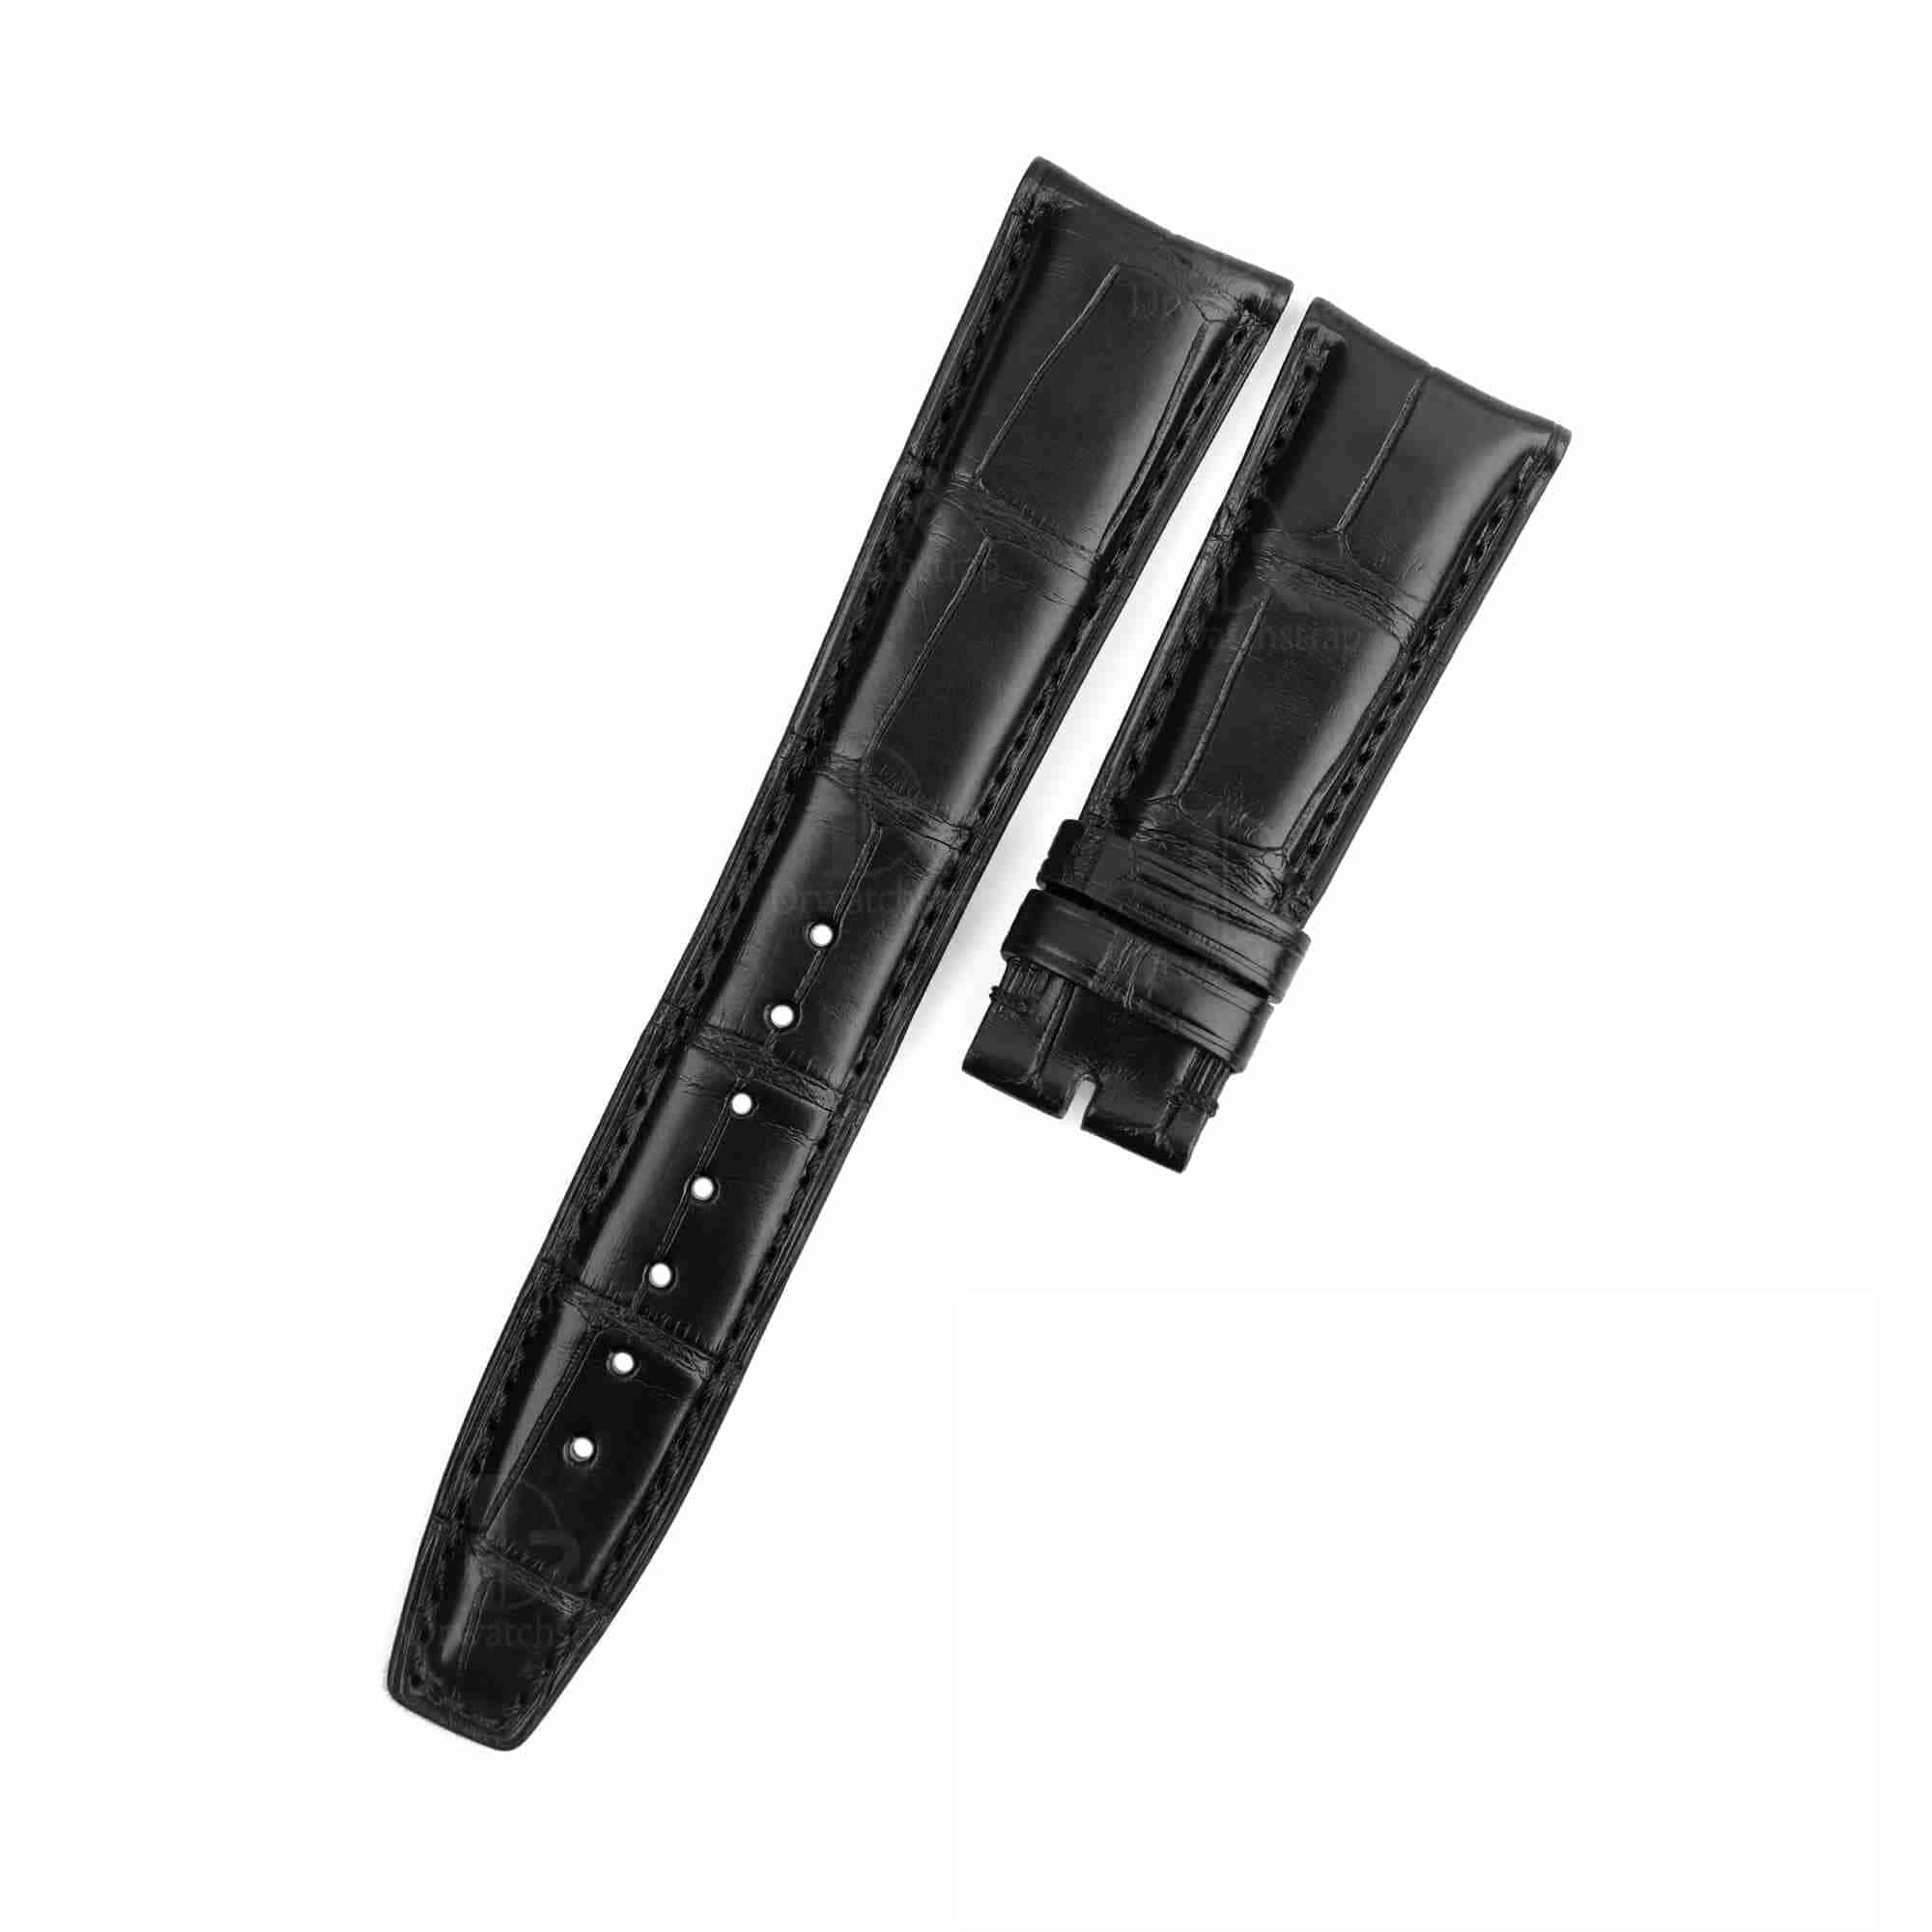 22mm replacement black leather watch band curved end fit for IWC Portuguese strap